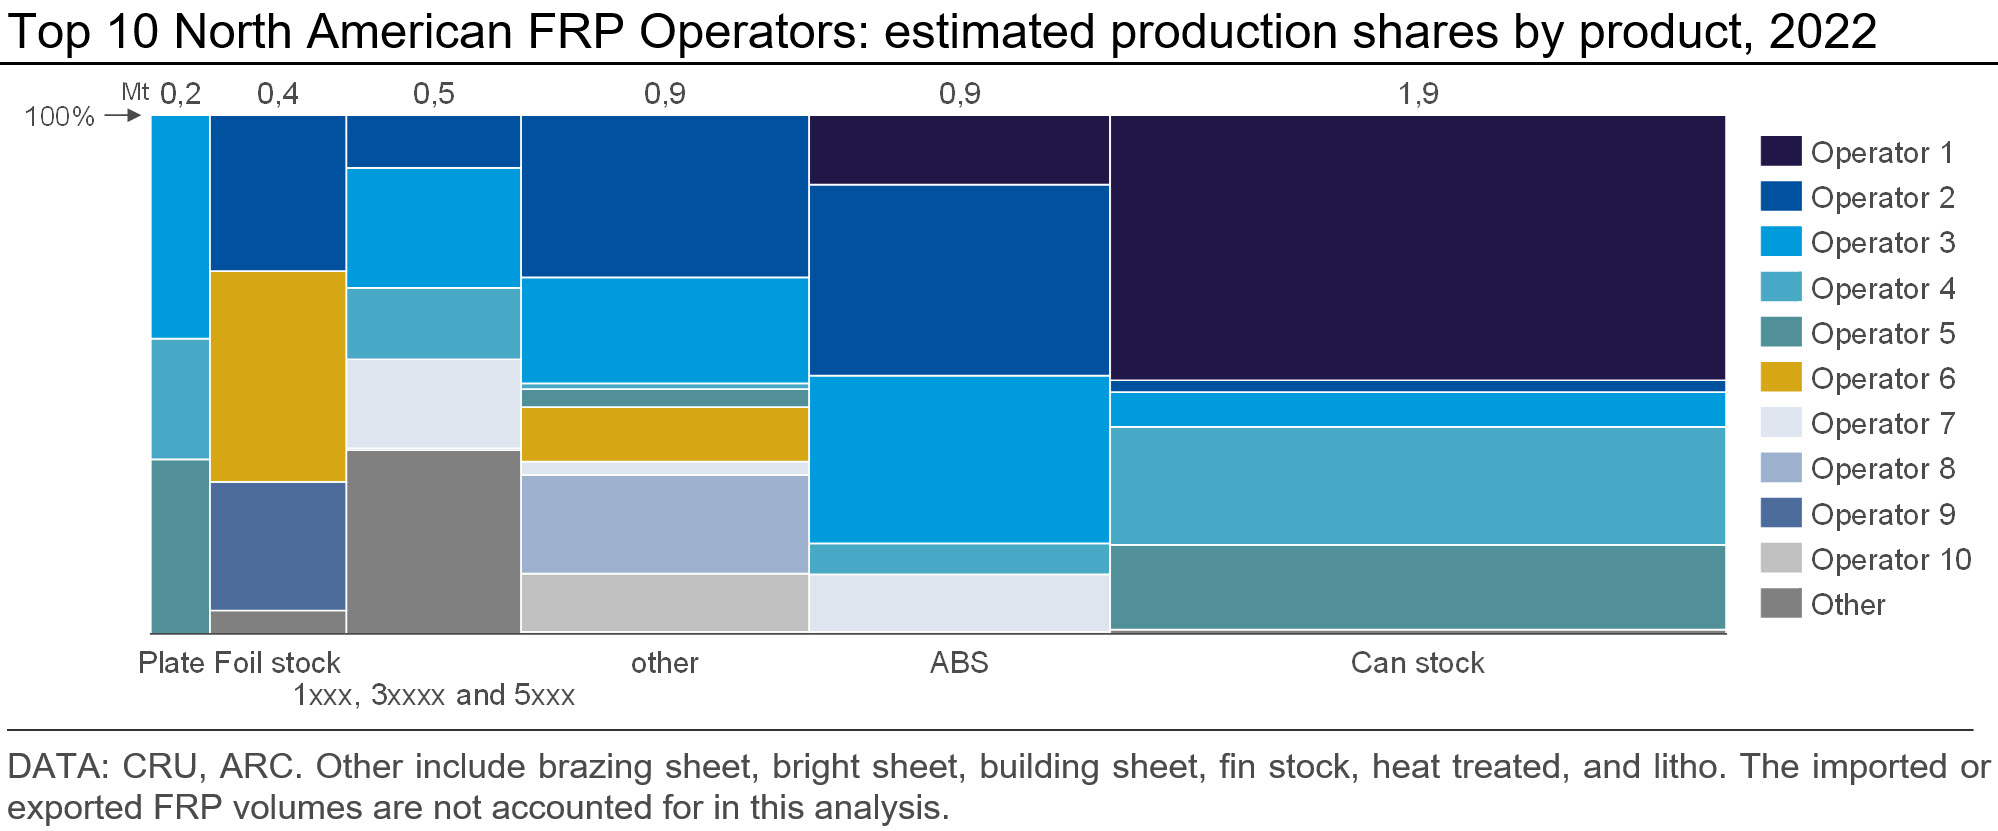 A chart showing the top 10 North American FRP operators based on estimated production shares by product in 2022.